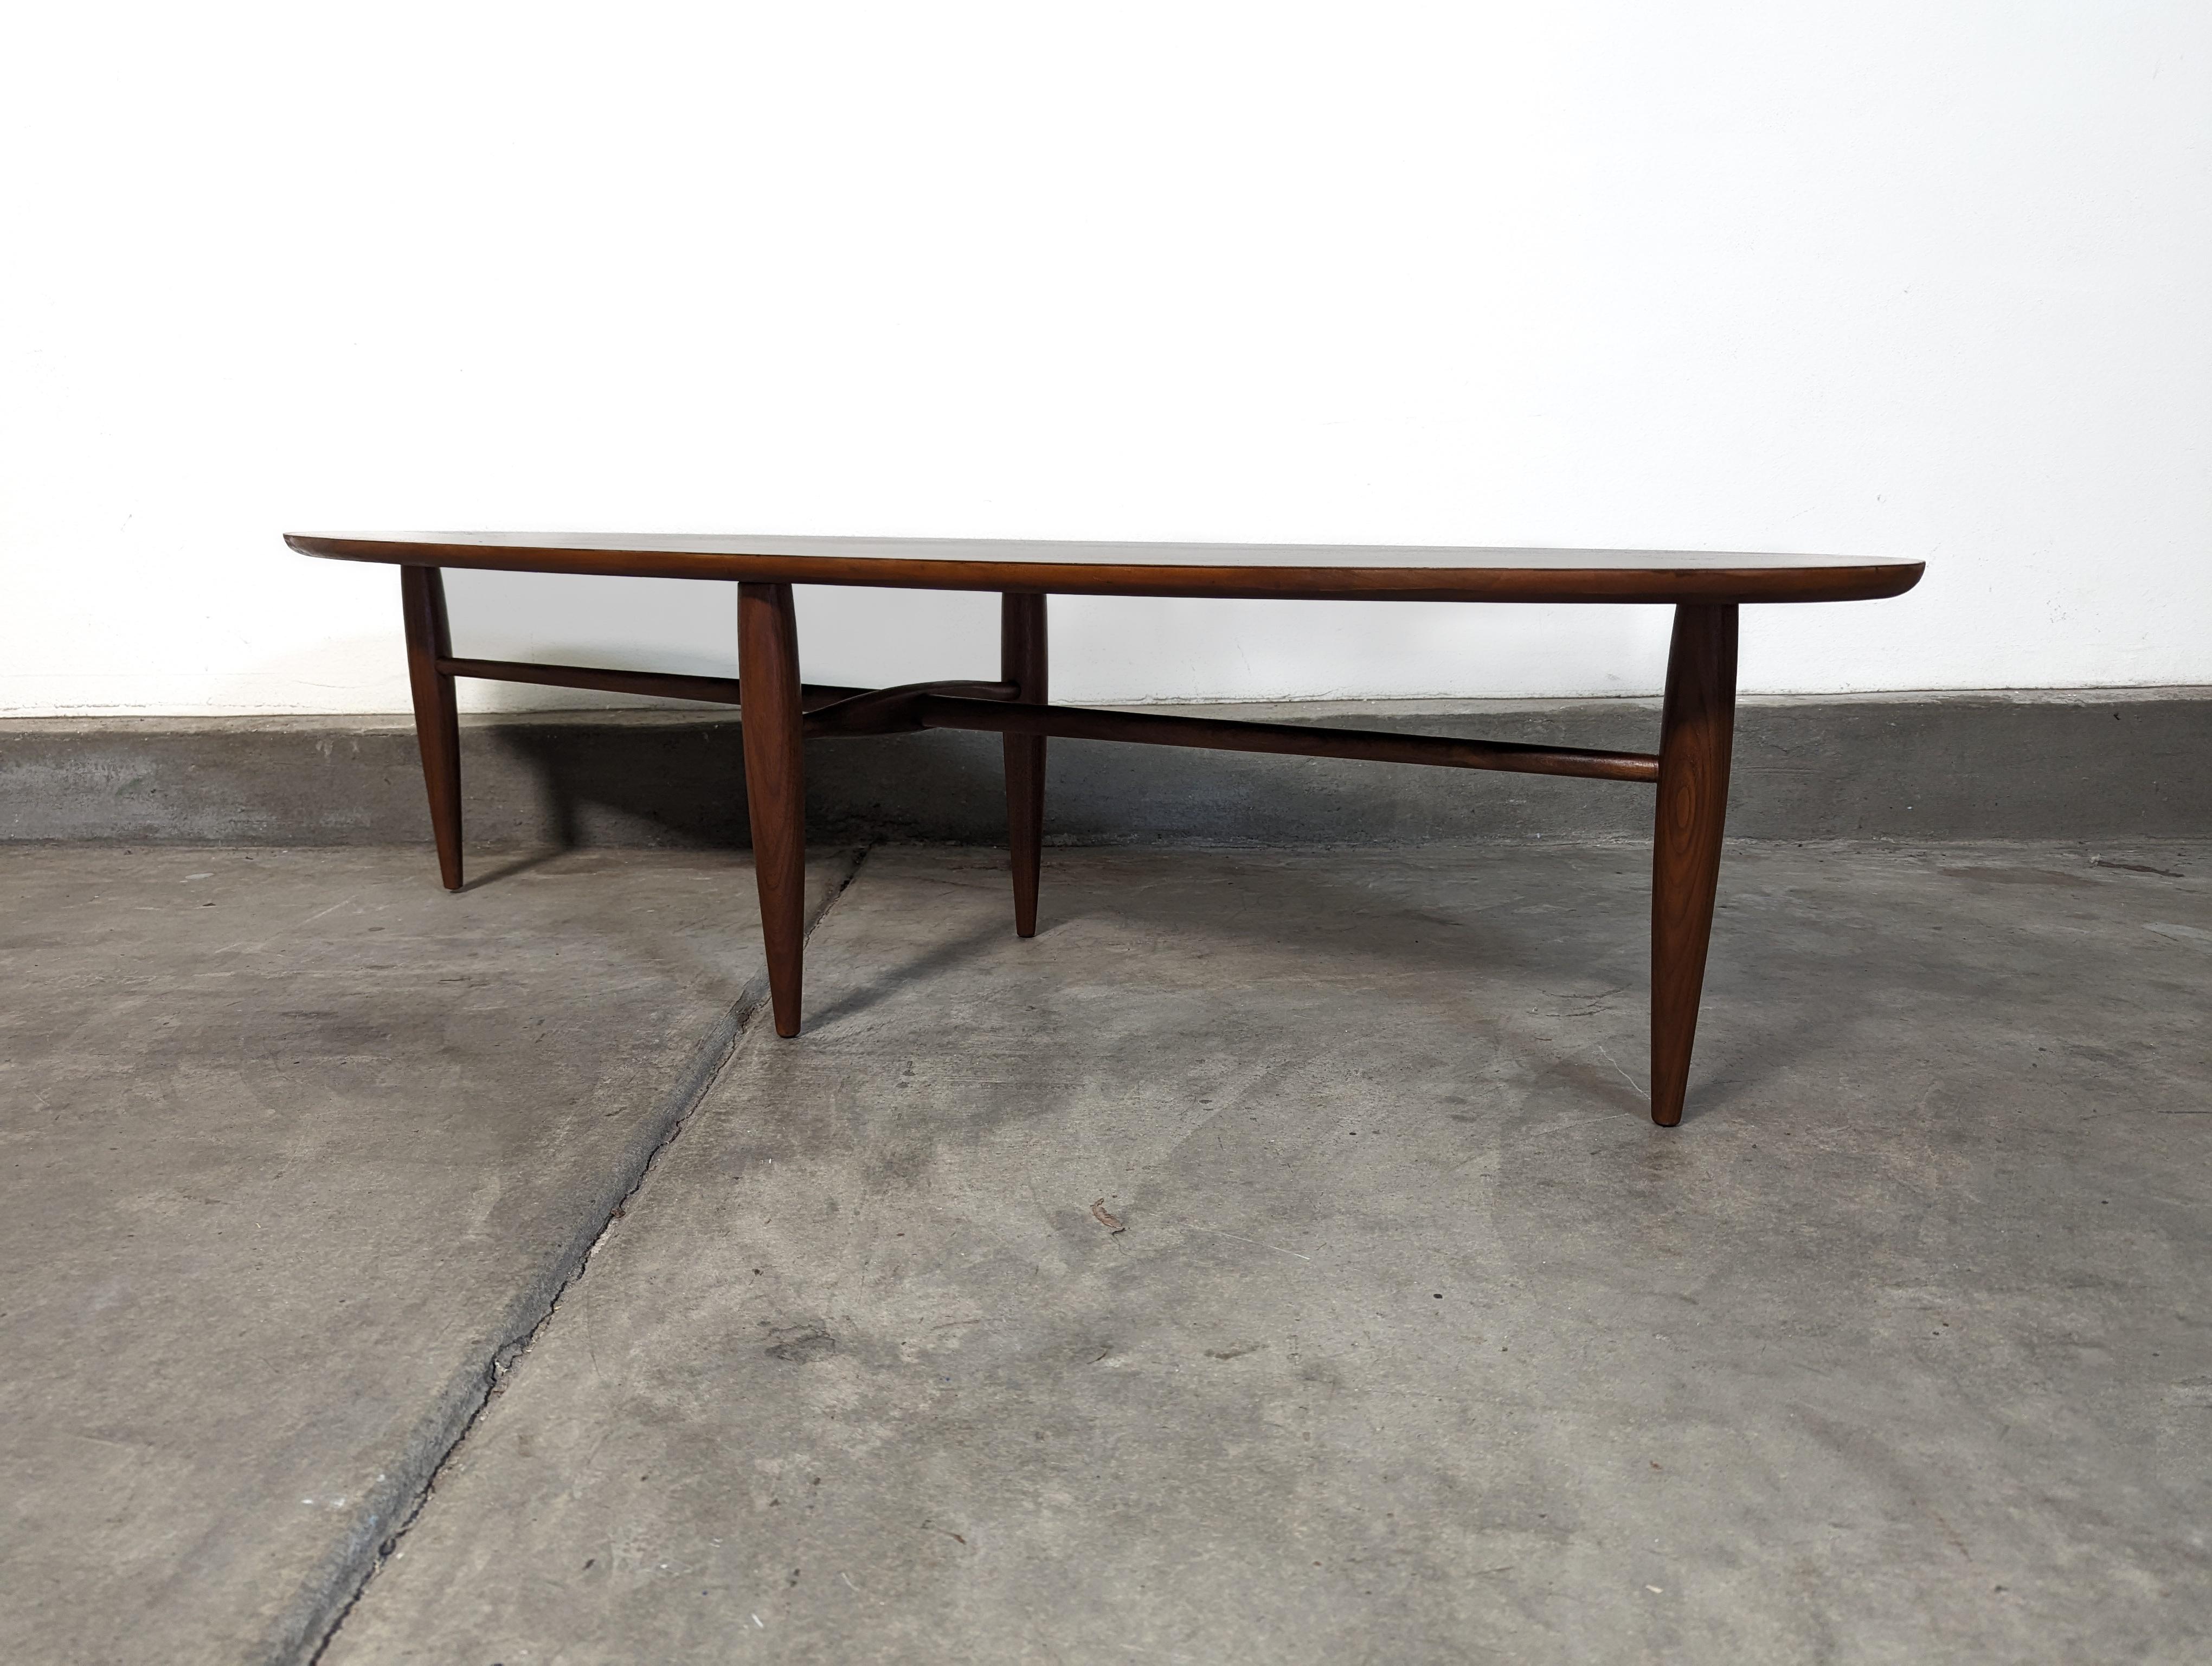 Mid-20th Century Mid Century Modern Surfboard Coffee Table by Mersman, c1960s For Sale